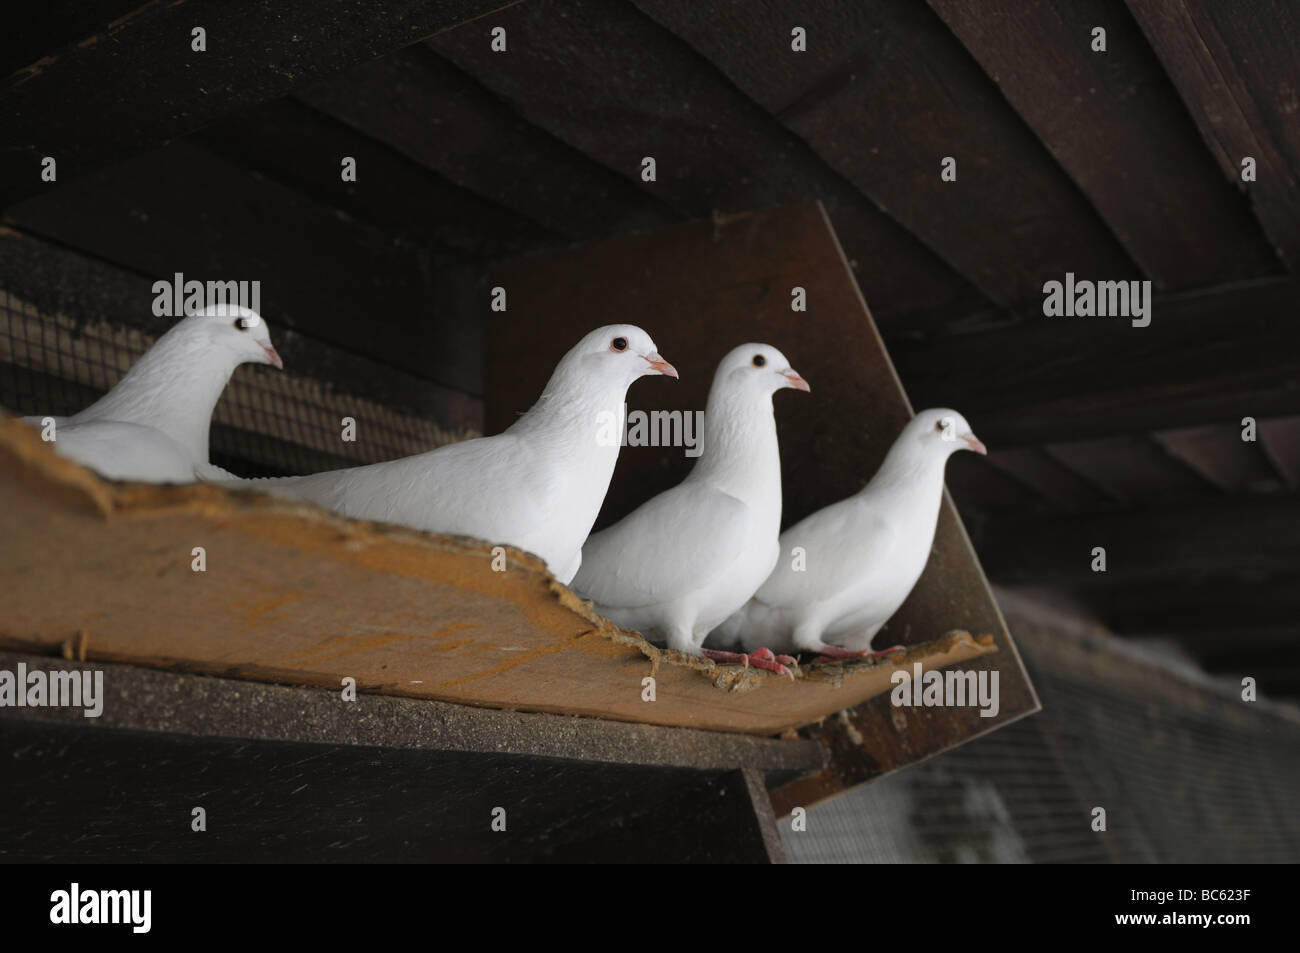 Low angle view of four doves on shelf Stock Photo